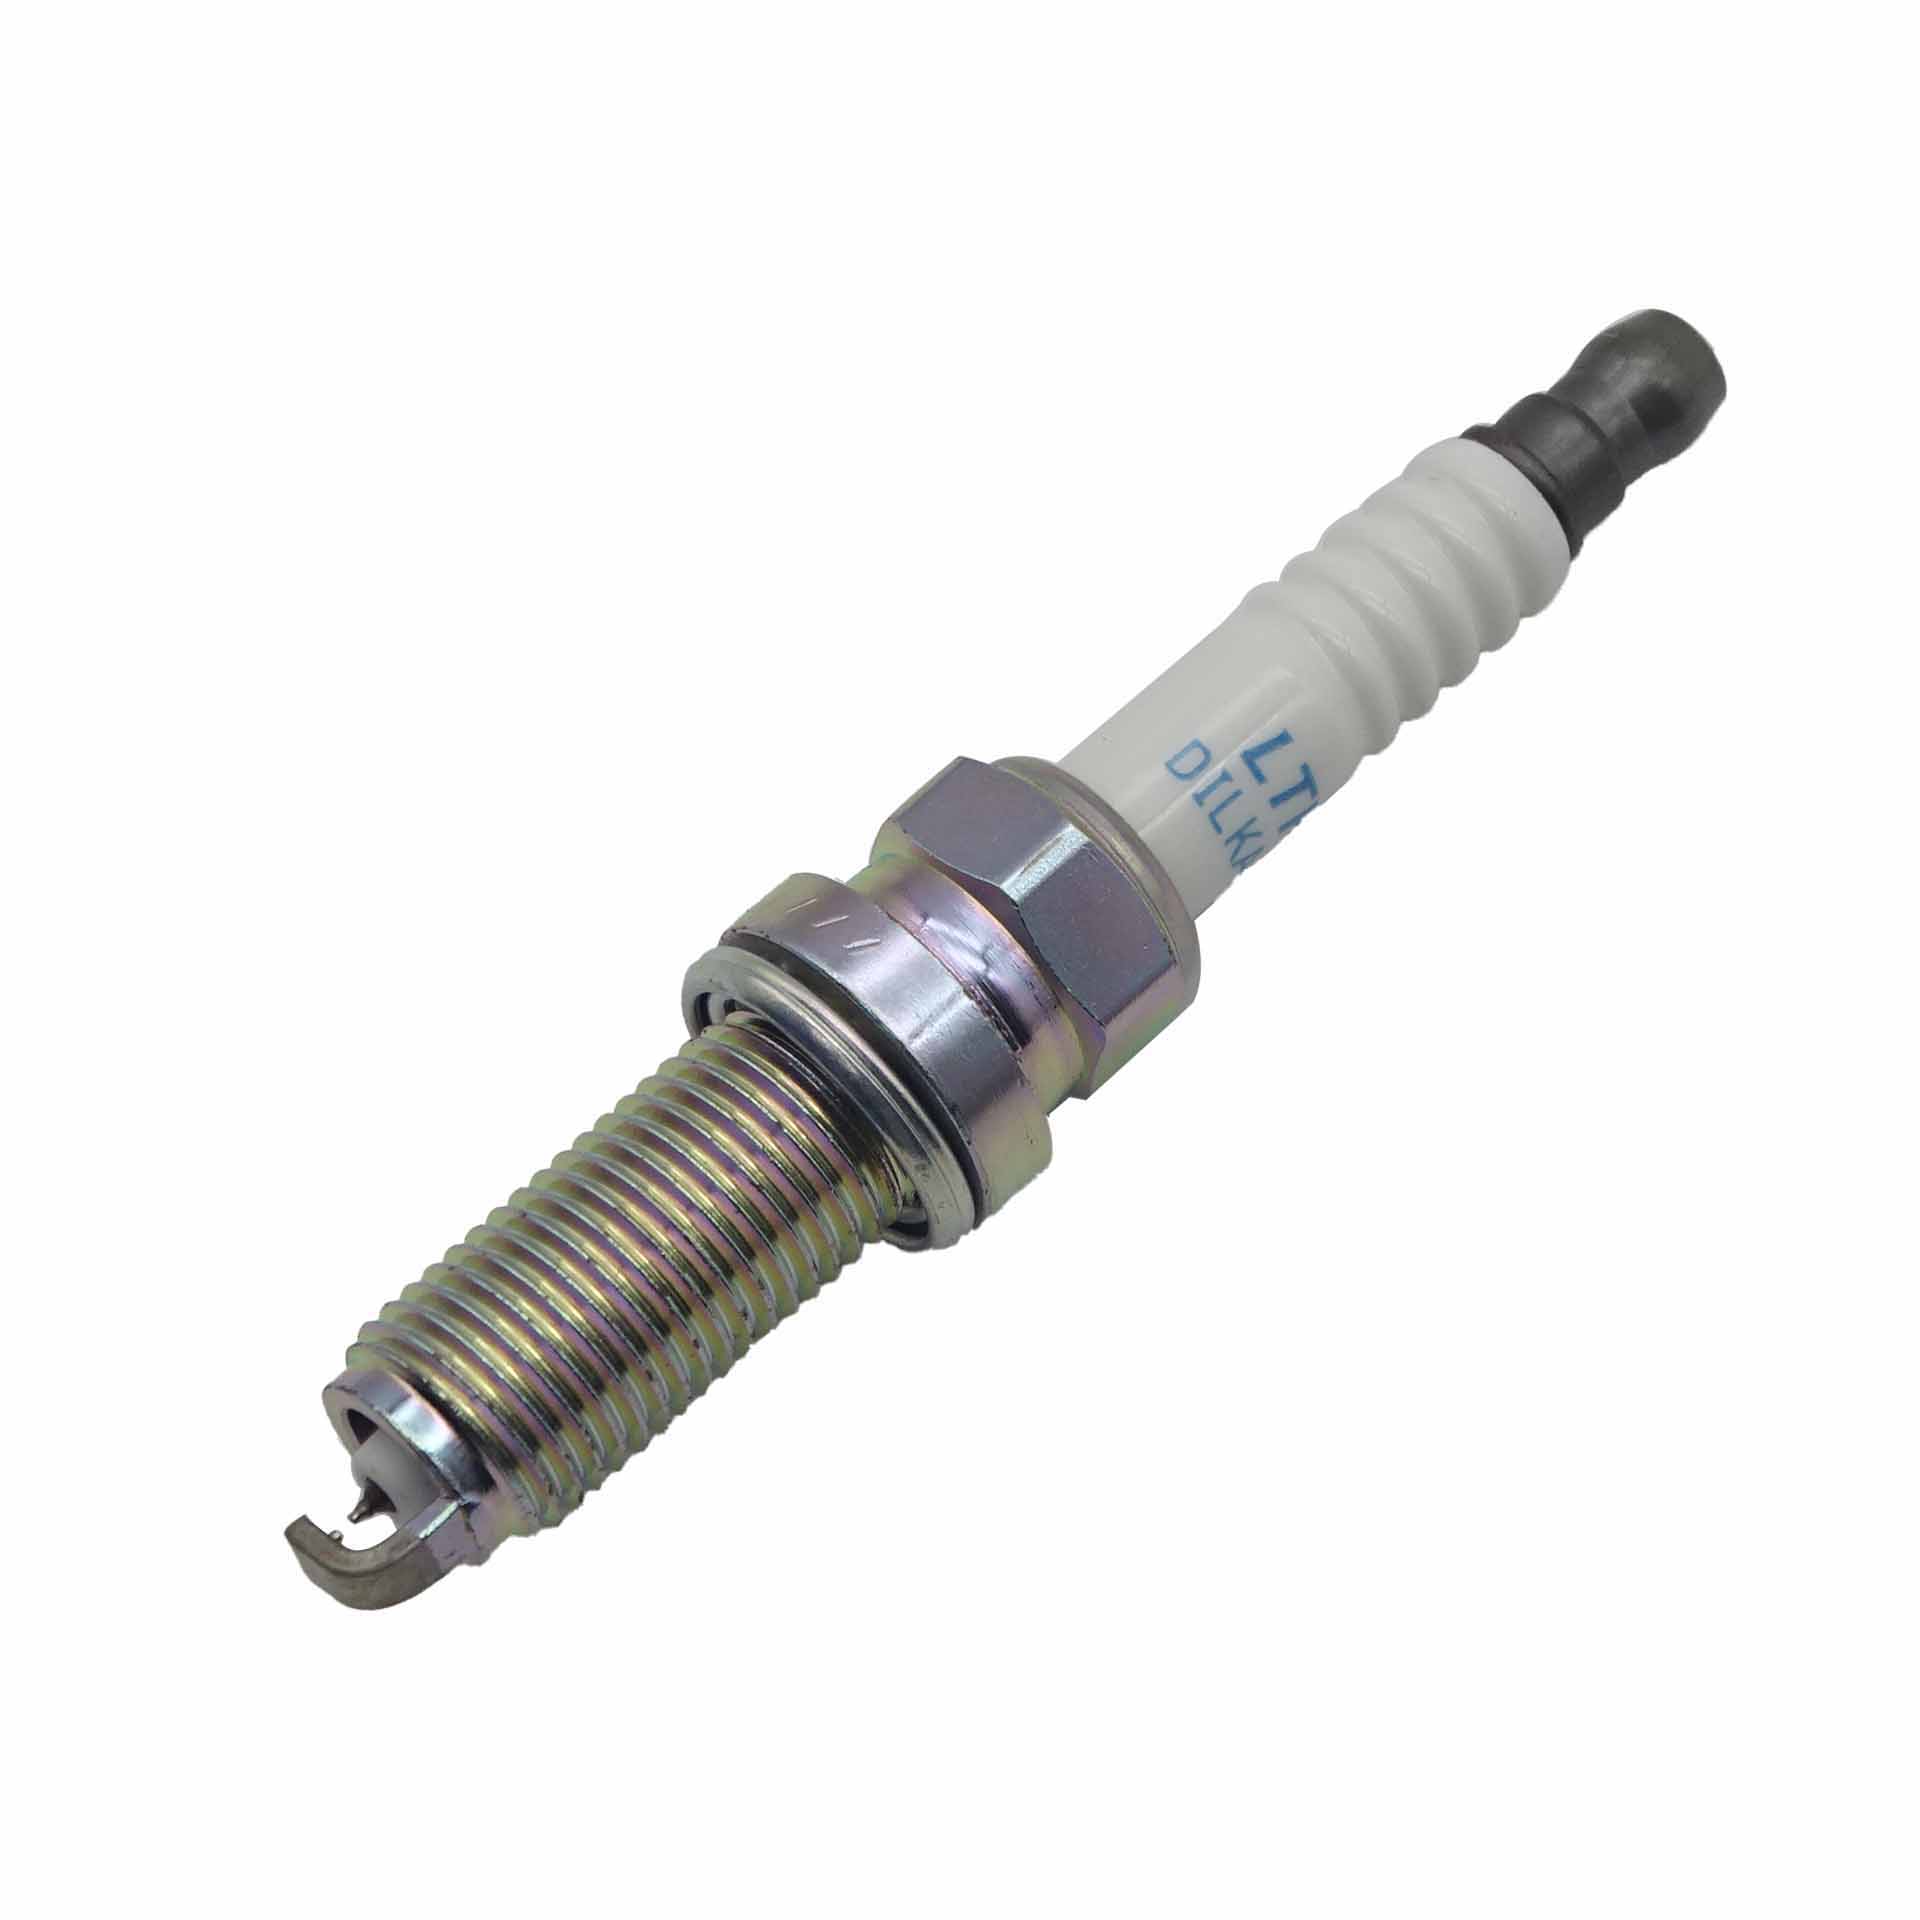 Spark Plug is suitable for Toyota Corolla 2014-2019 OE:90919-C1007